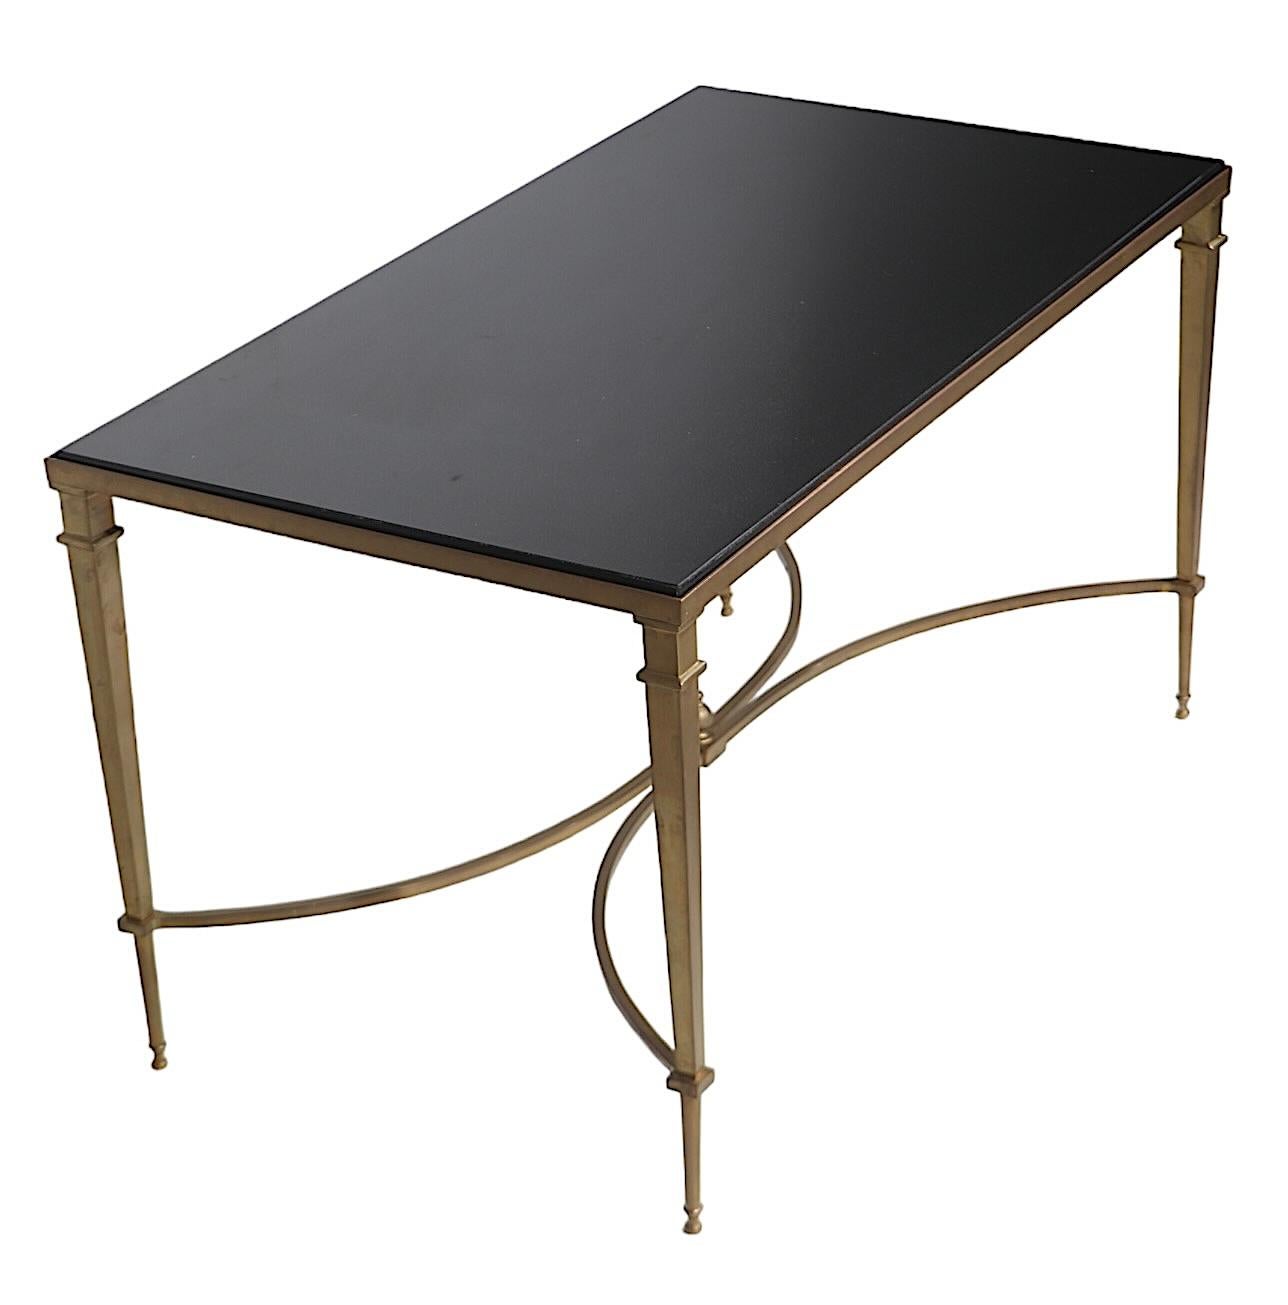 Hollywood Regency Neoclassic Style Brass and Granite Coffee Table c 1960/70's  For Sale 11